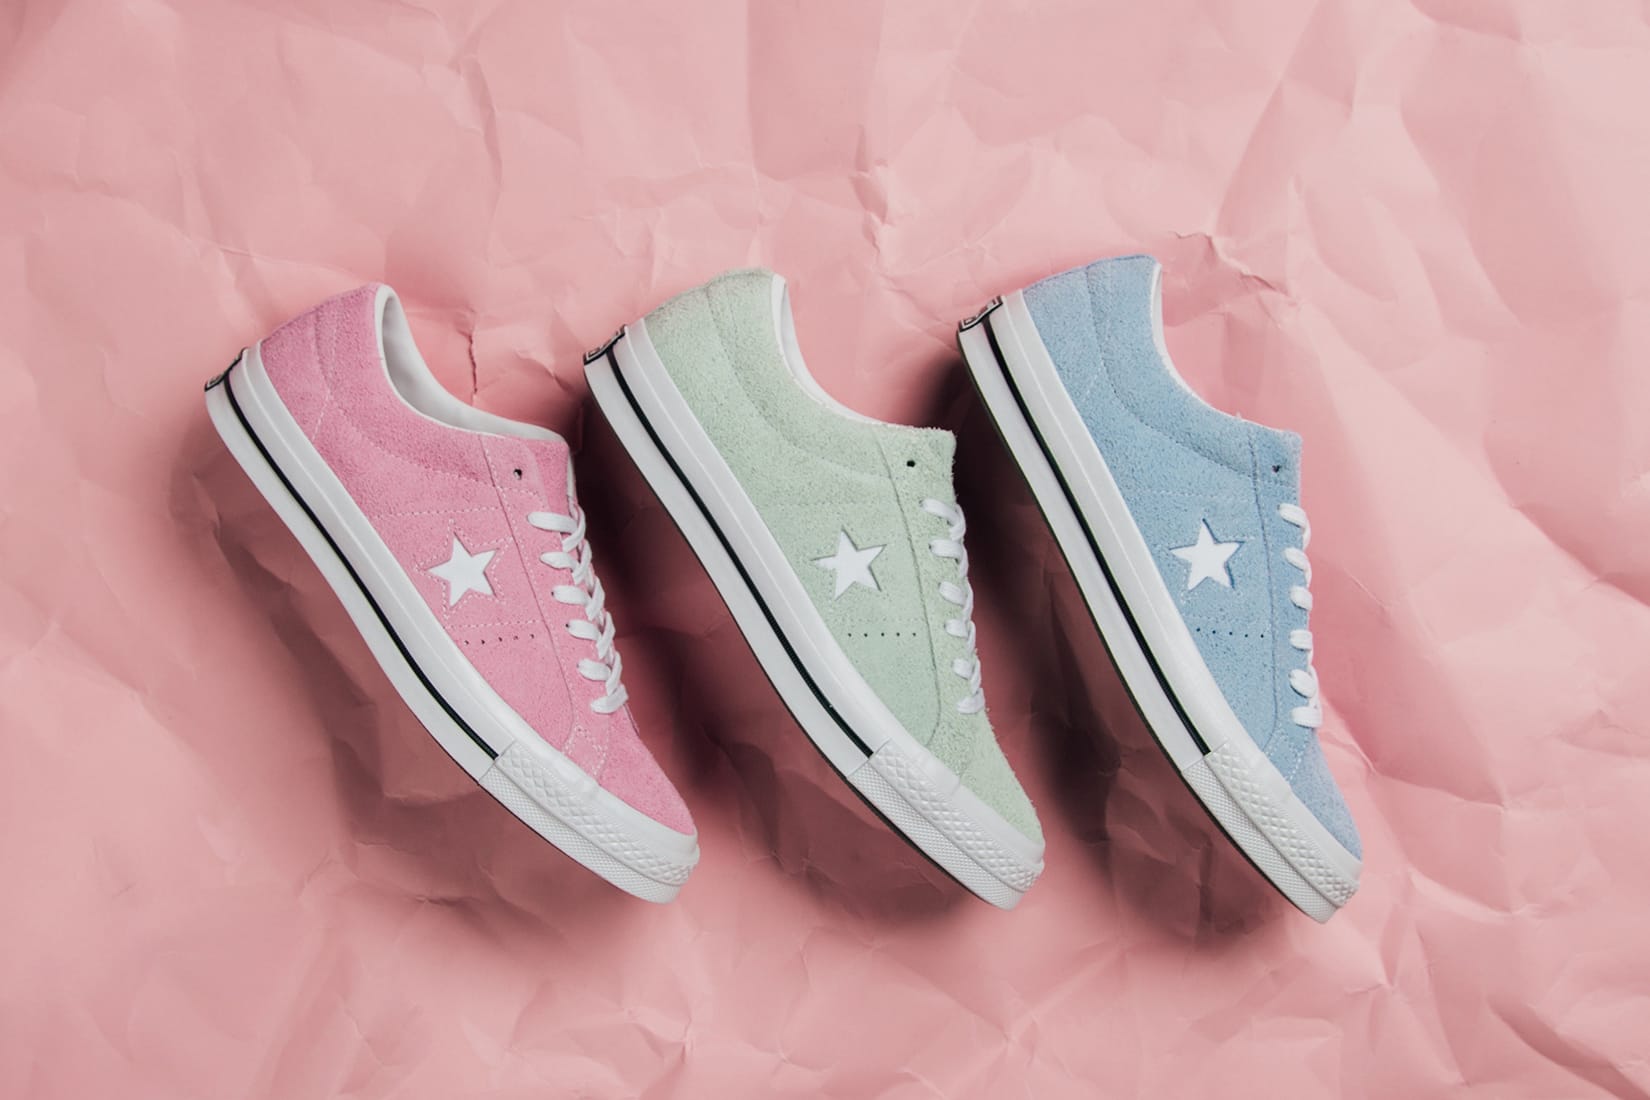 converse one star colors